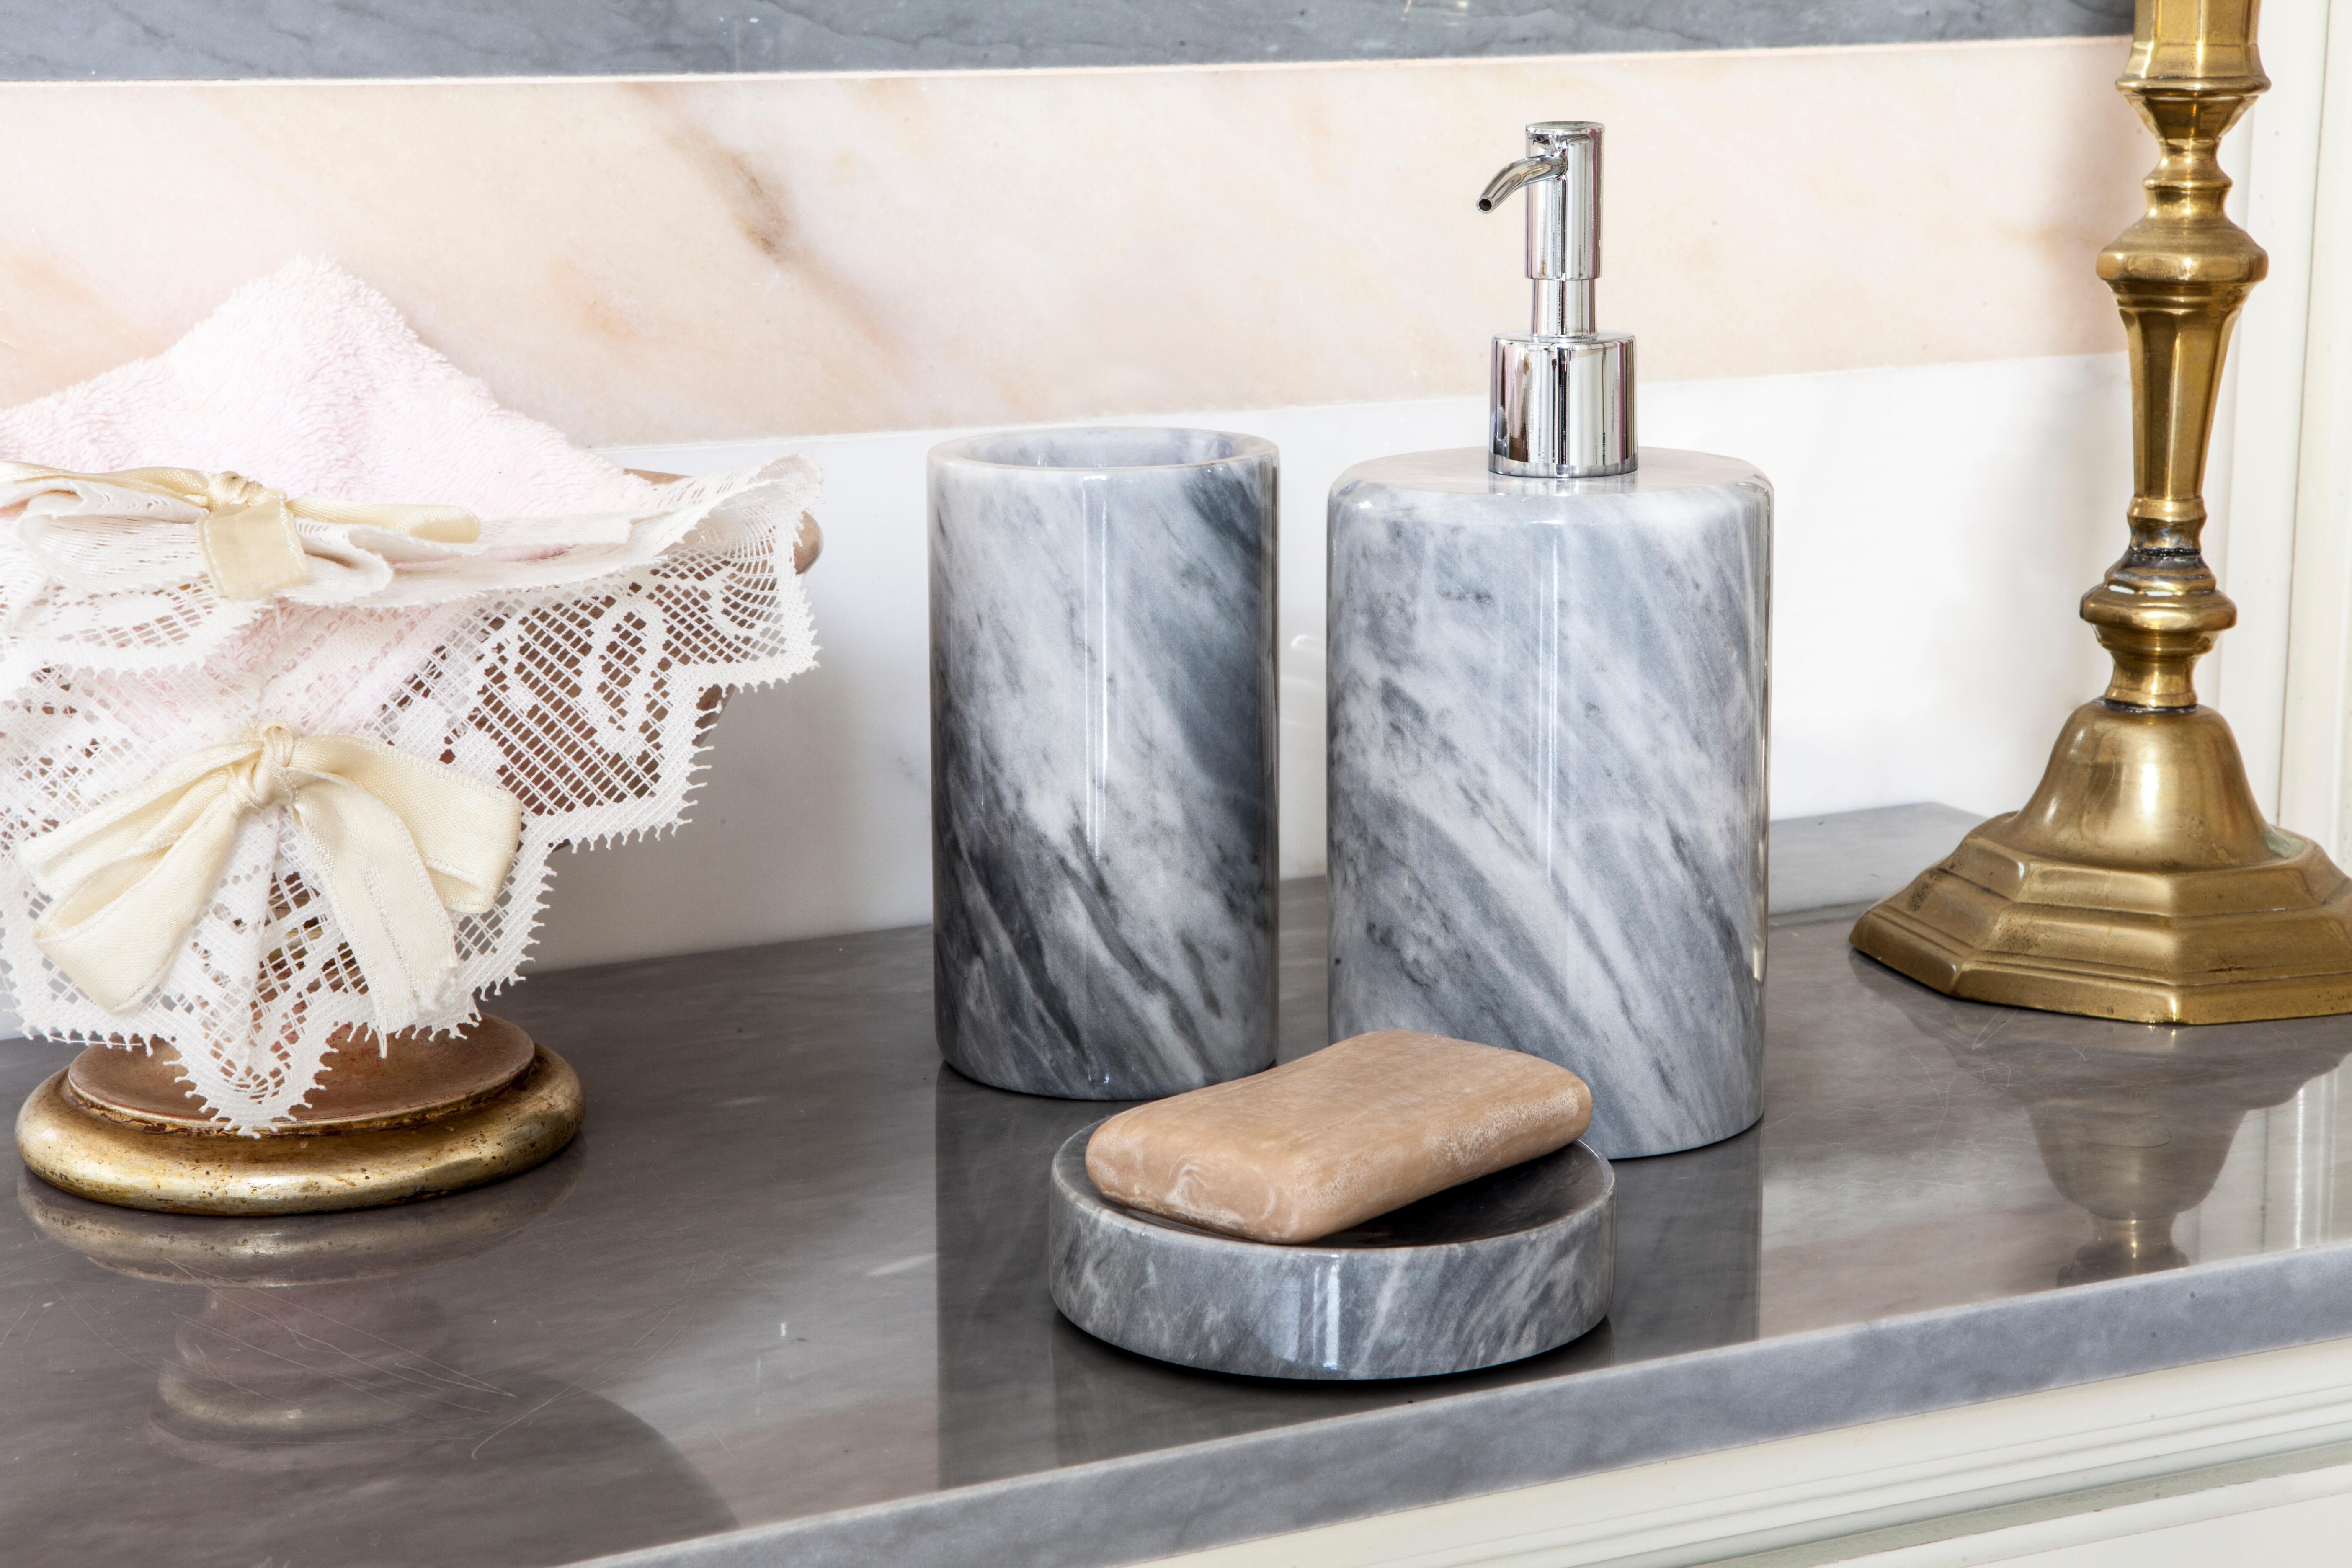 A rounded set for the bathroom in grey Bardiglio marble which includes: One soap dispenser (diameter 9 x 19.5 cm), one toothbrush holder (diameter 7 x 12 cm), one soap dish (10 x 2 cm).
Each piece is in a way unique (since each marble block is